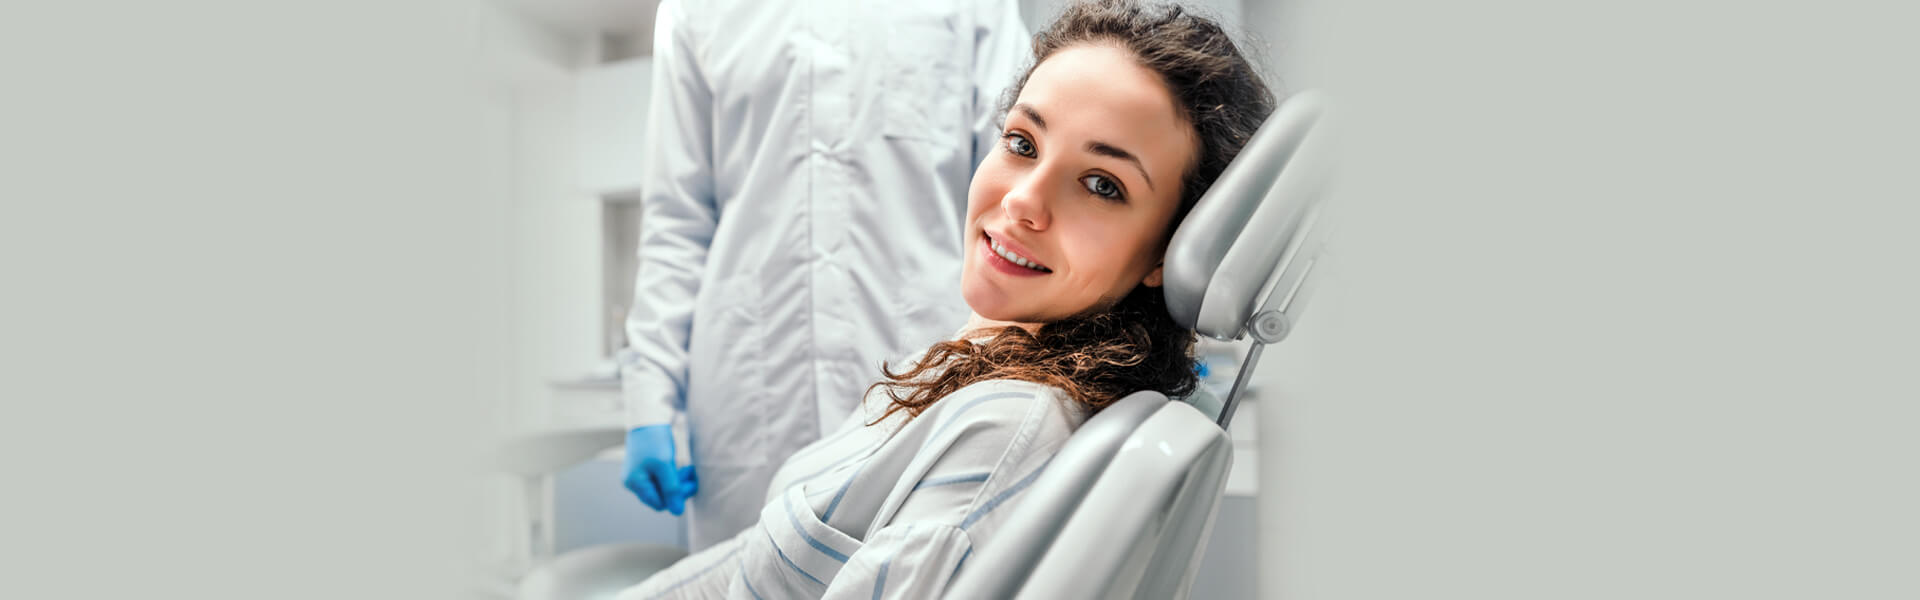 How Do You Know an Endodontic ( Root Canal) Treatment is Ideal?